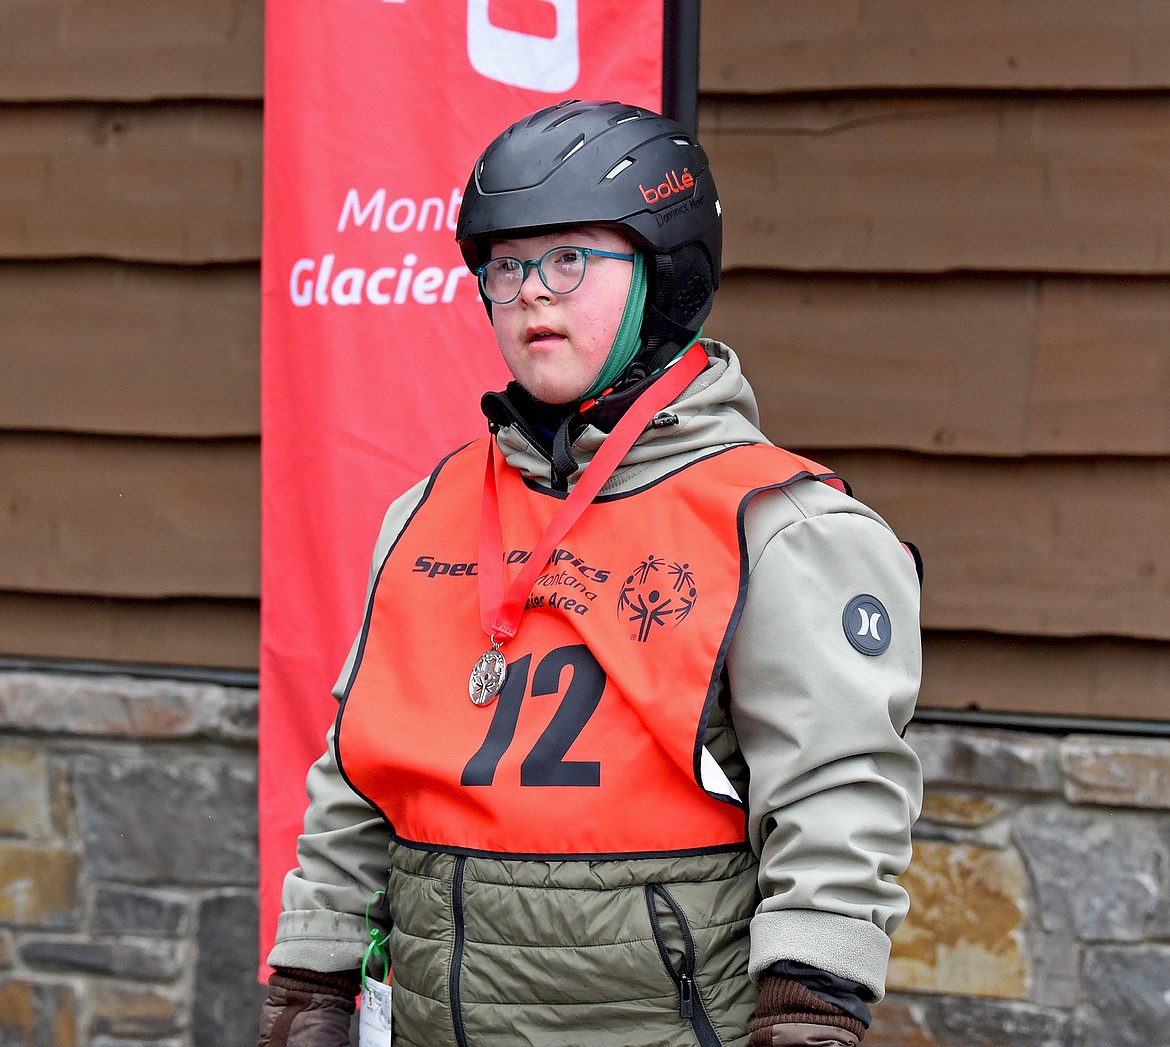 A racer gets a silver medal after competing in the alpine ski races at the Special Olympics Montana Winter Games at Whitefish Mountain Resort on Wednesday, March 1. (Whitney England/Whitefish Pilot)